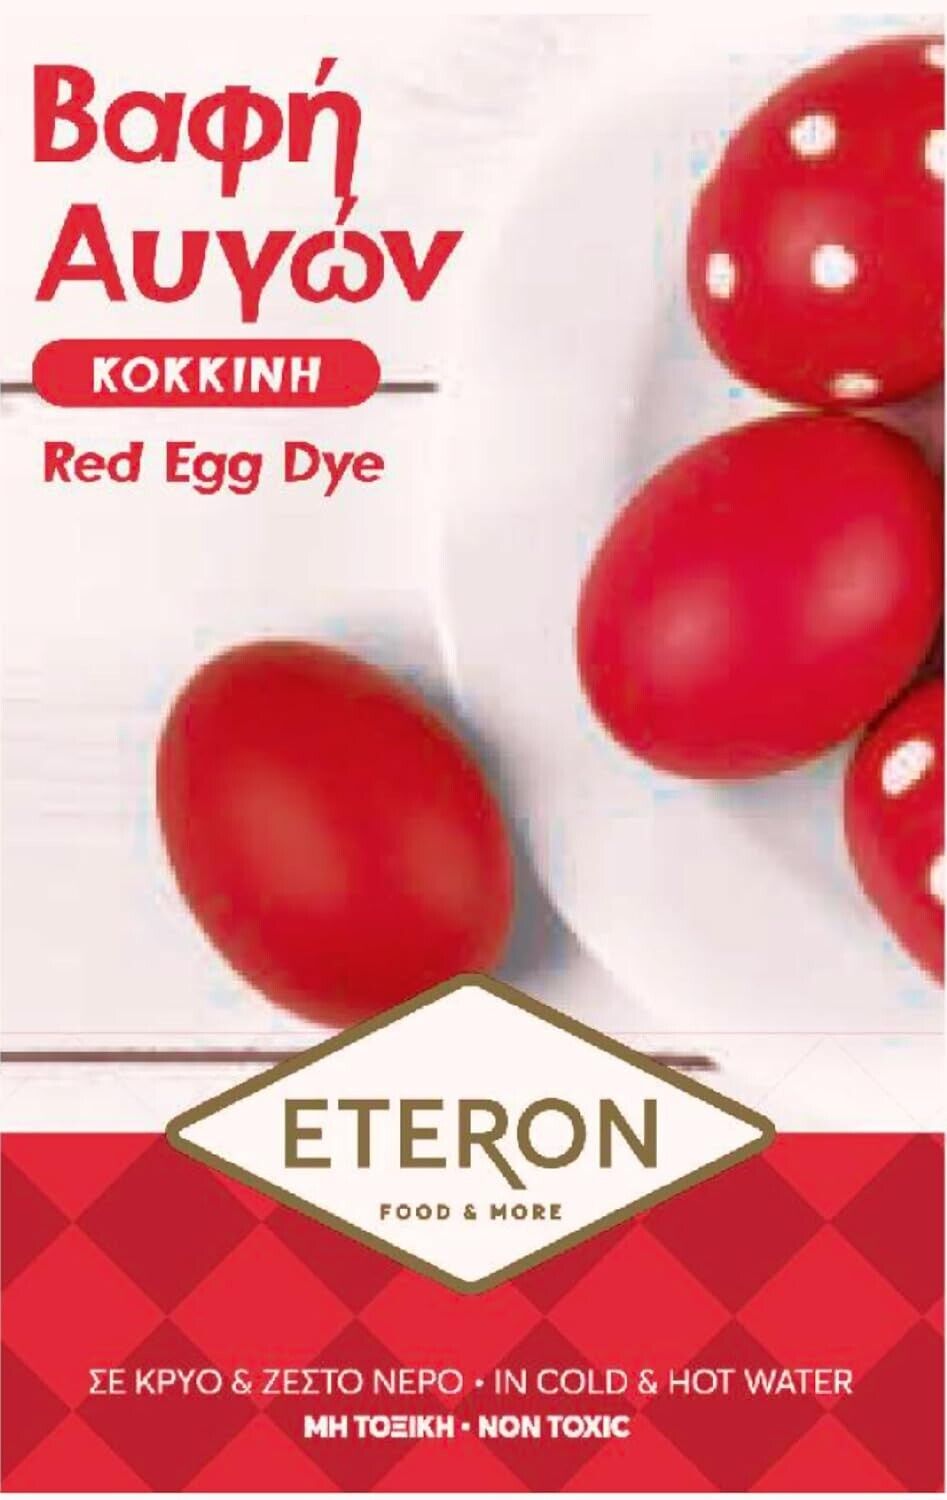 Red Egg Dye Greek Orthodox Traditional Easter Very Easy Coloring